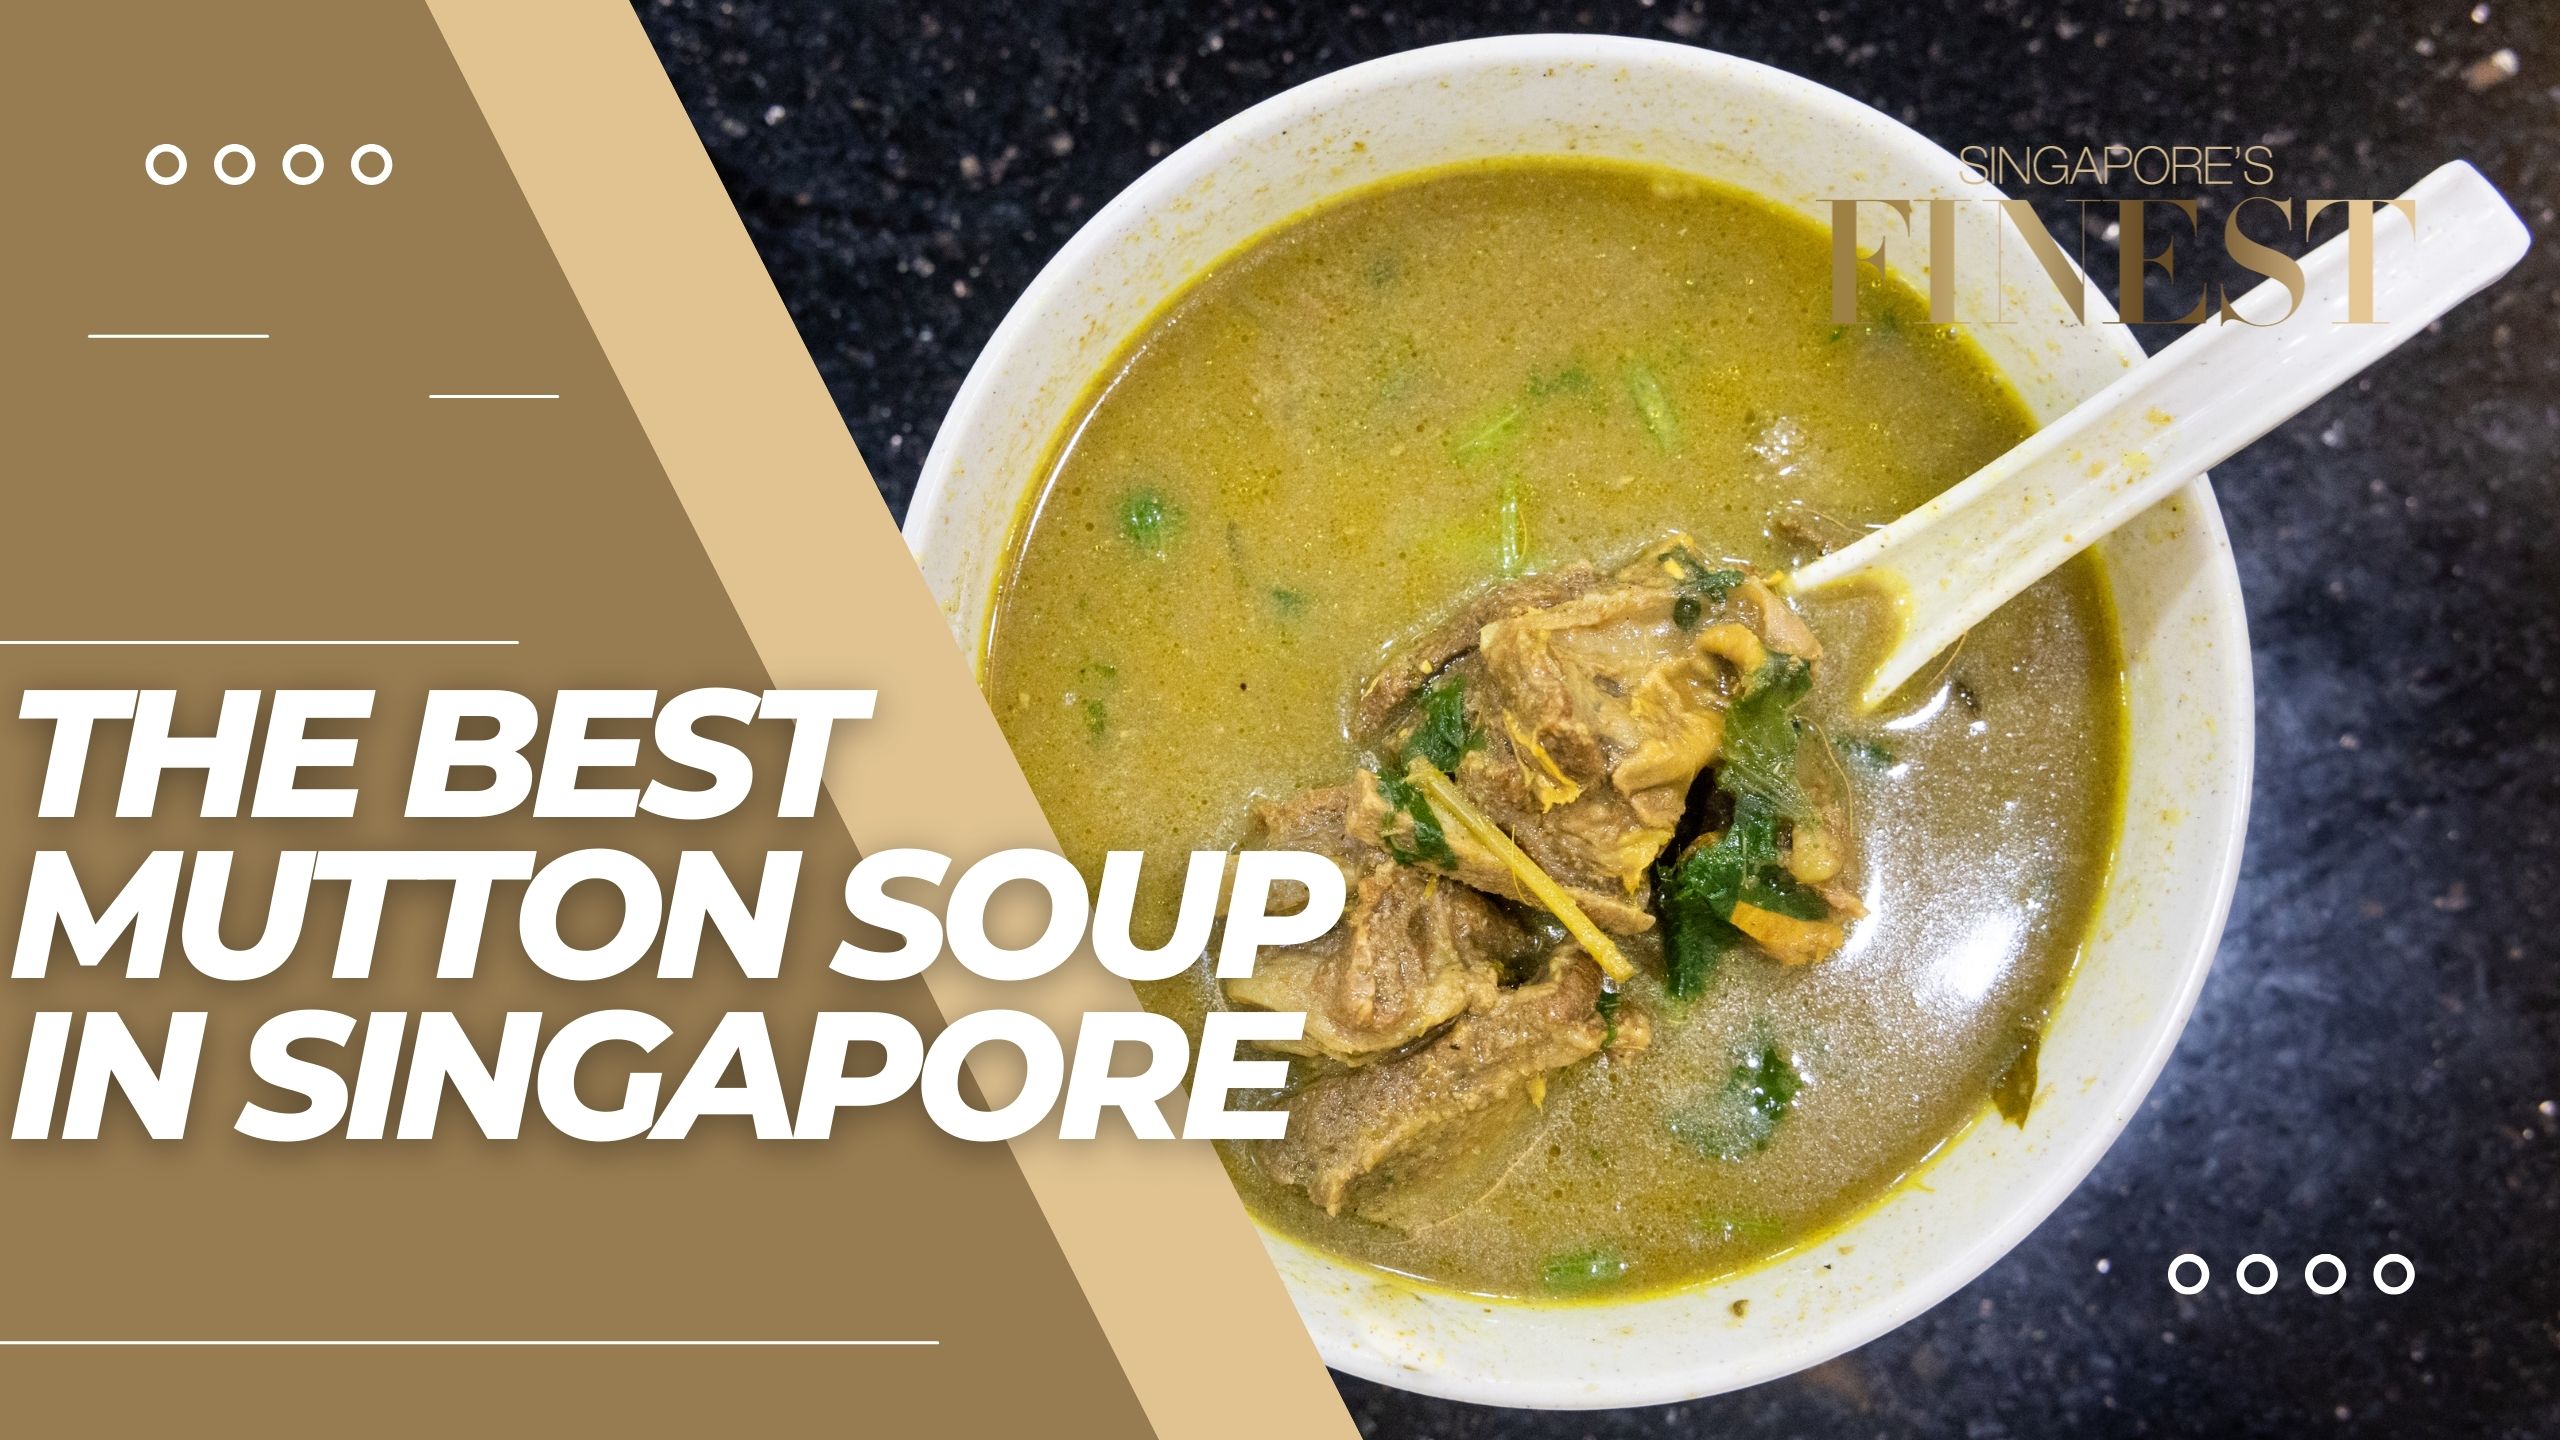 The Finest Mutton Soup in Singapore